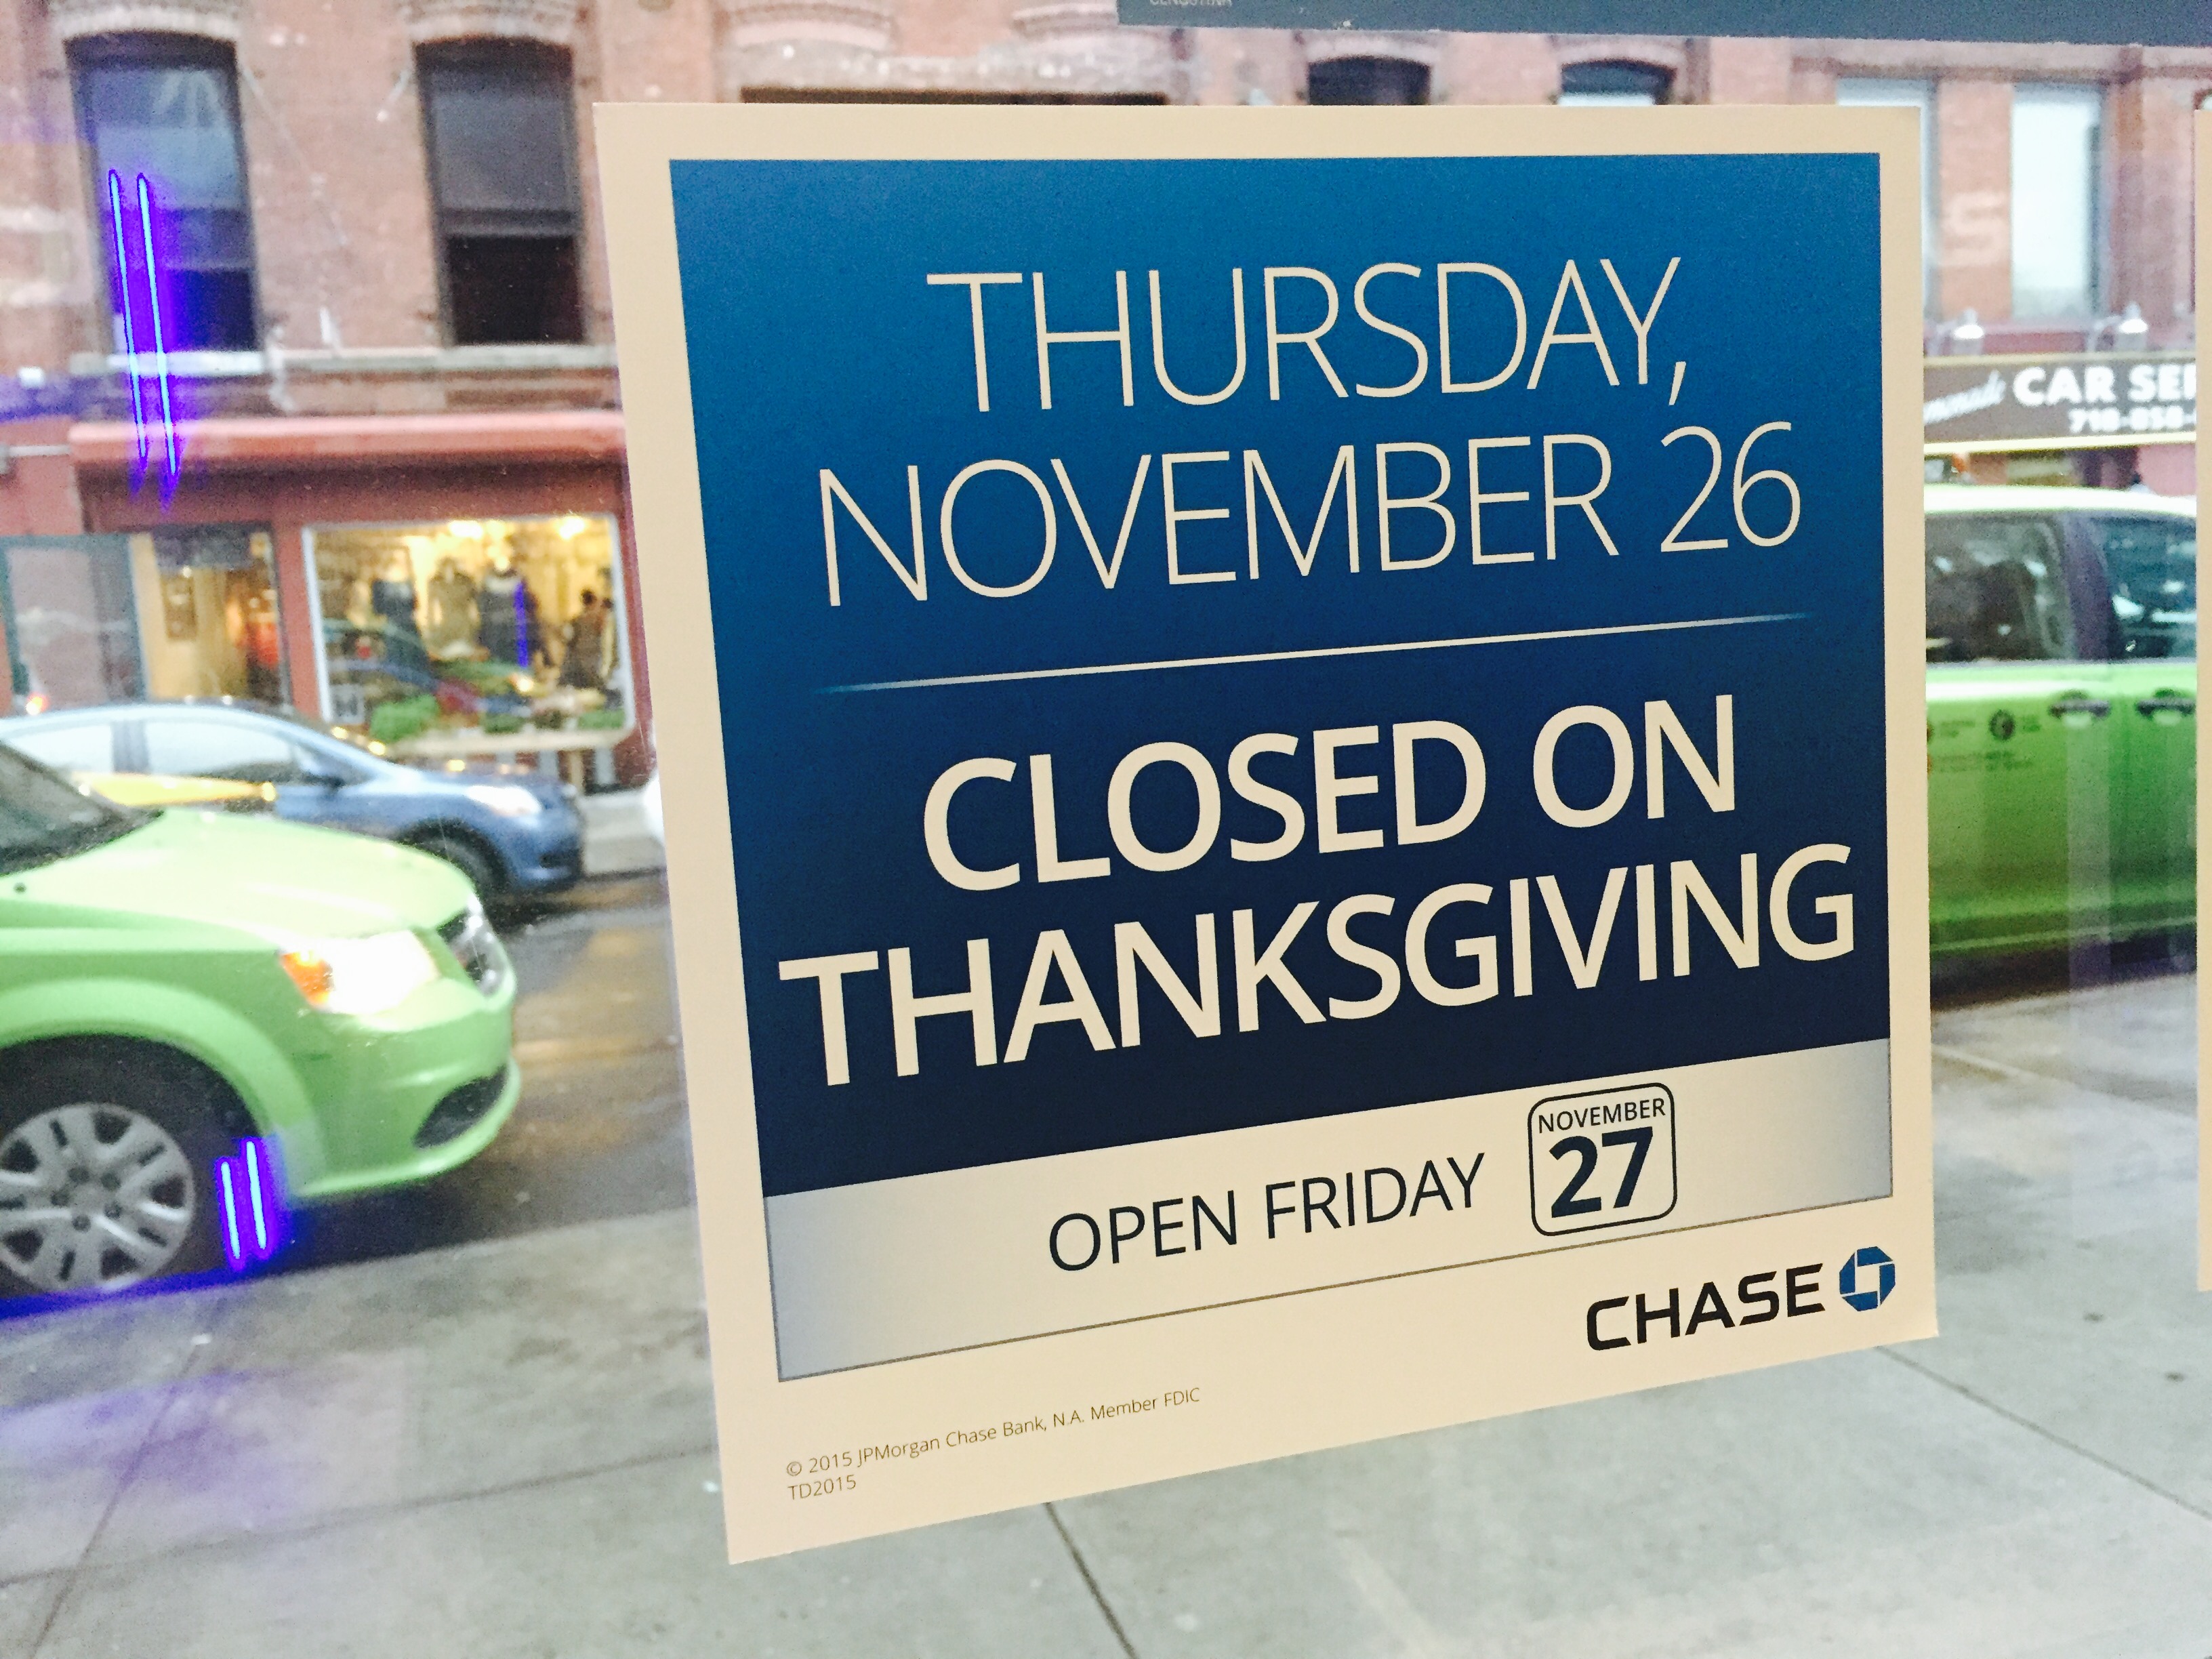 is stock market open day before thanksgiving